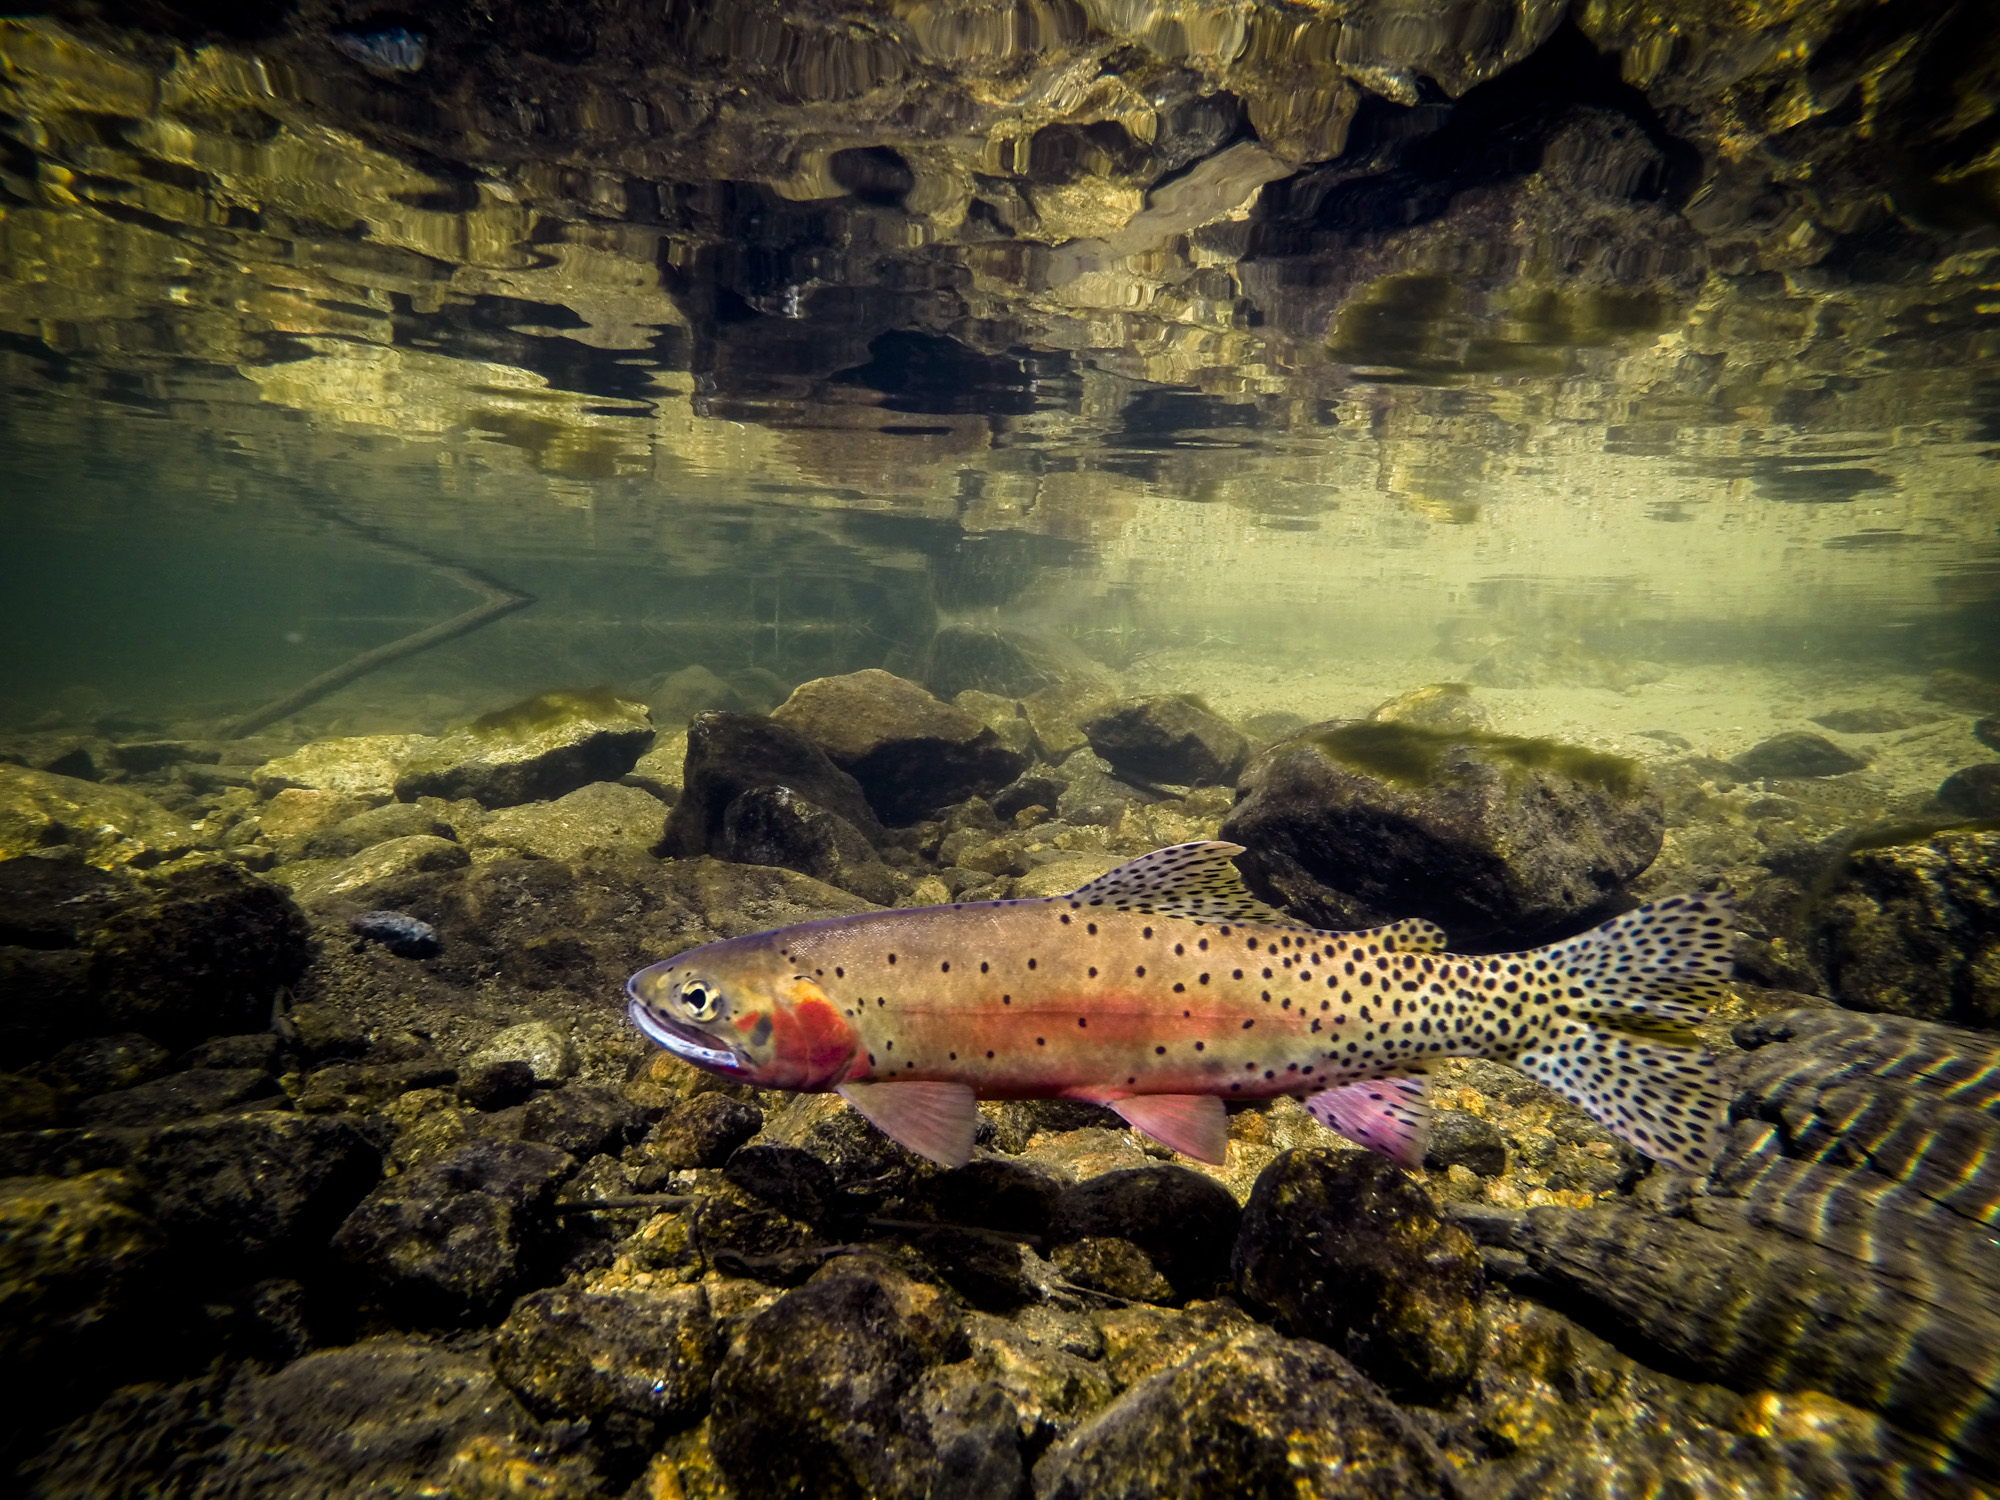  A greenback cutthroat in spawning colors.&nbsp; 